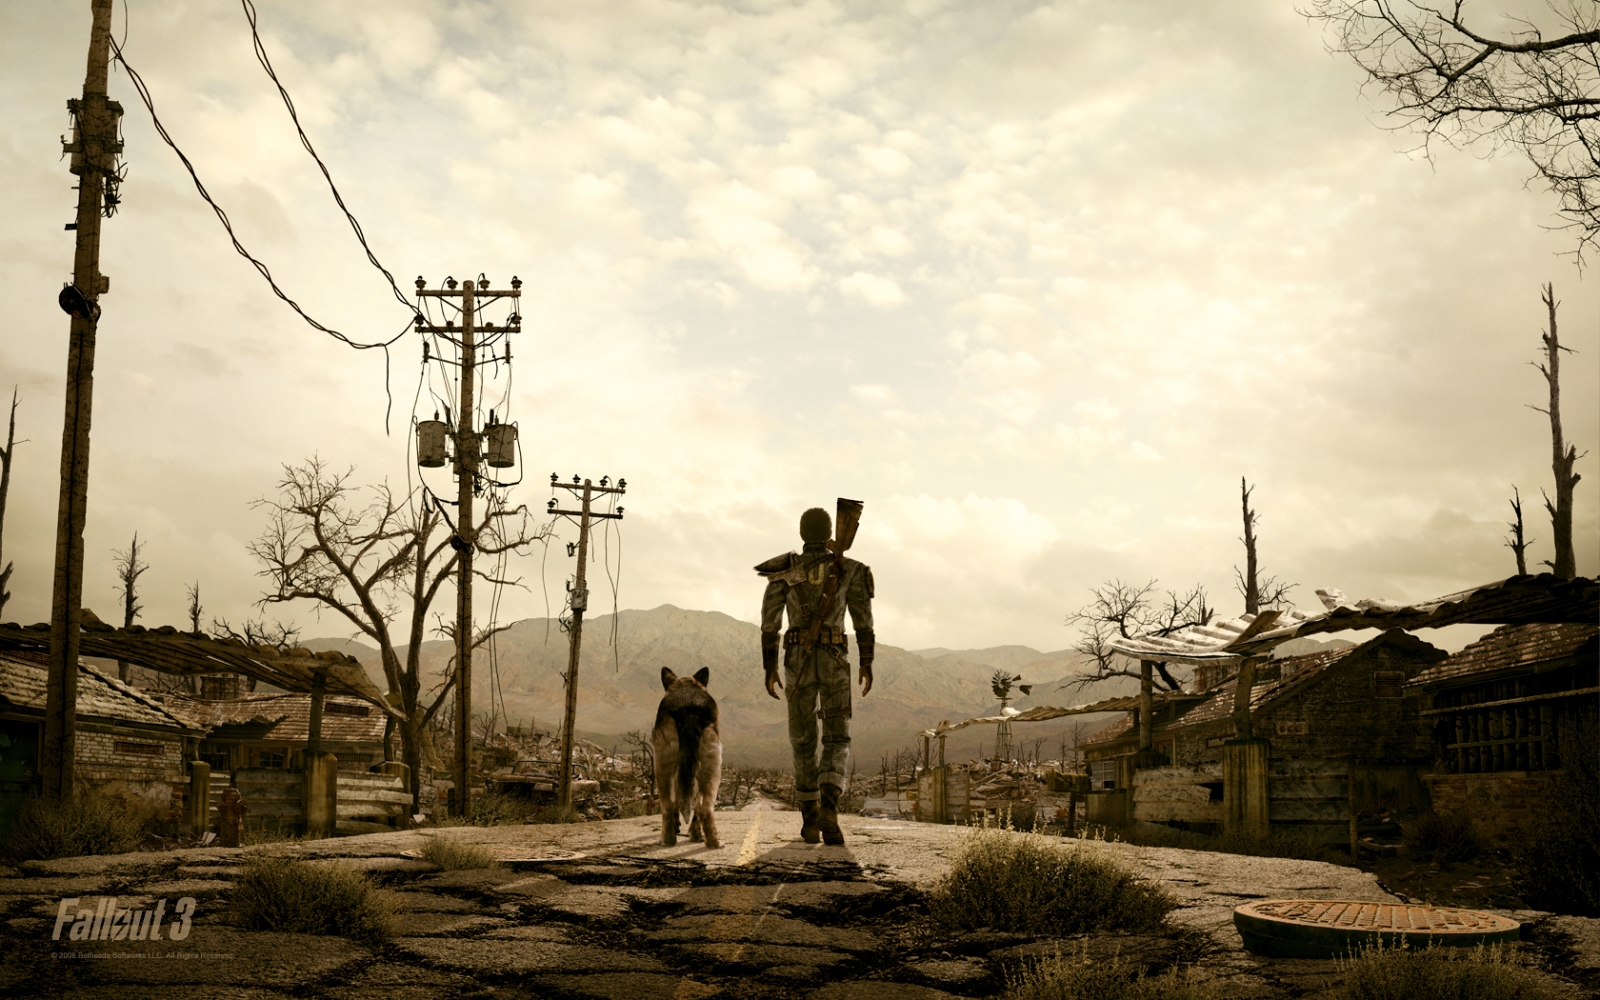 Fallout 3 - The Road - 1920X1080p